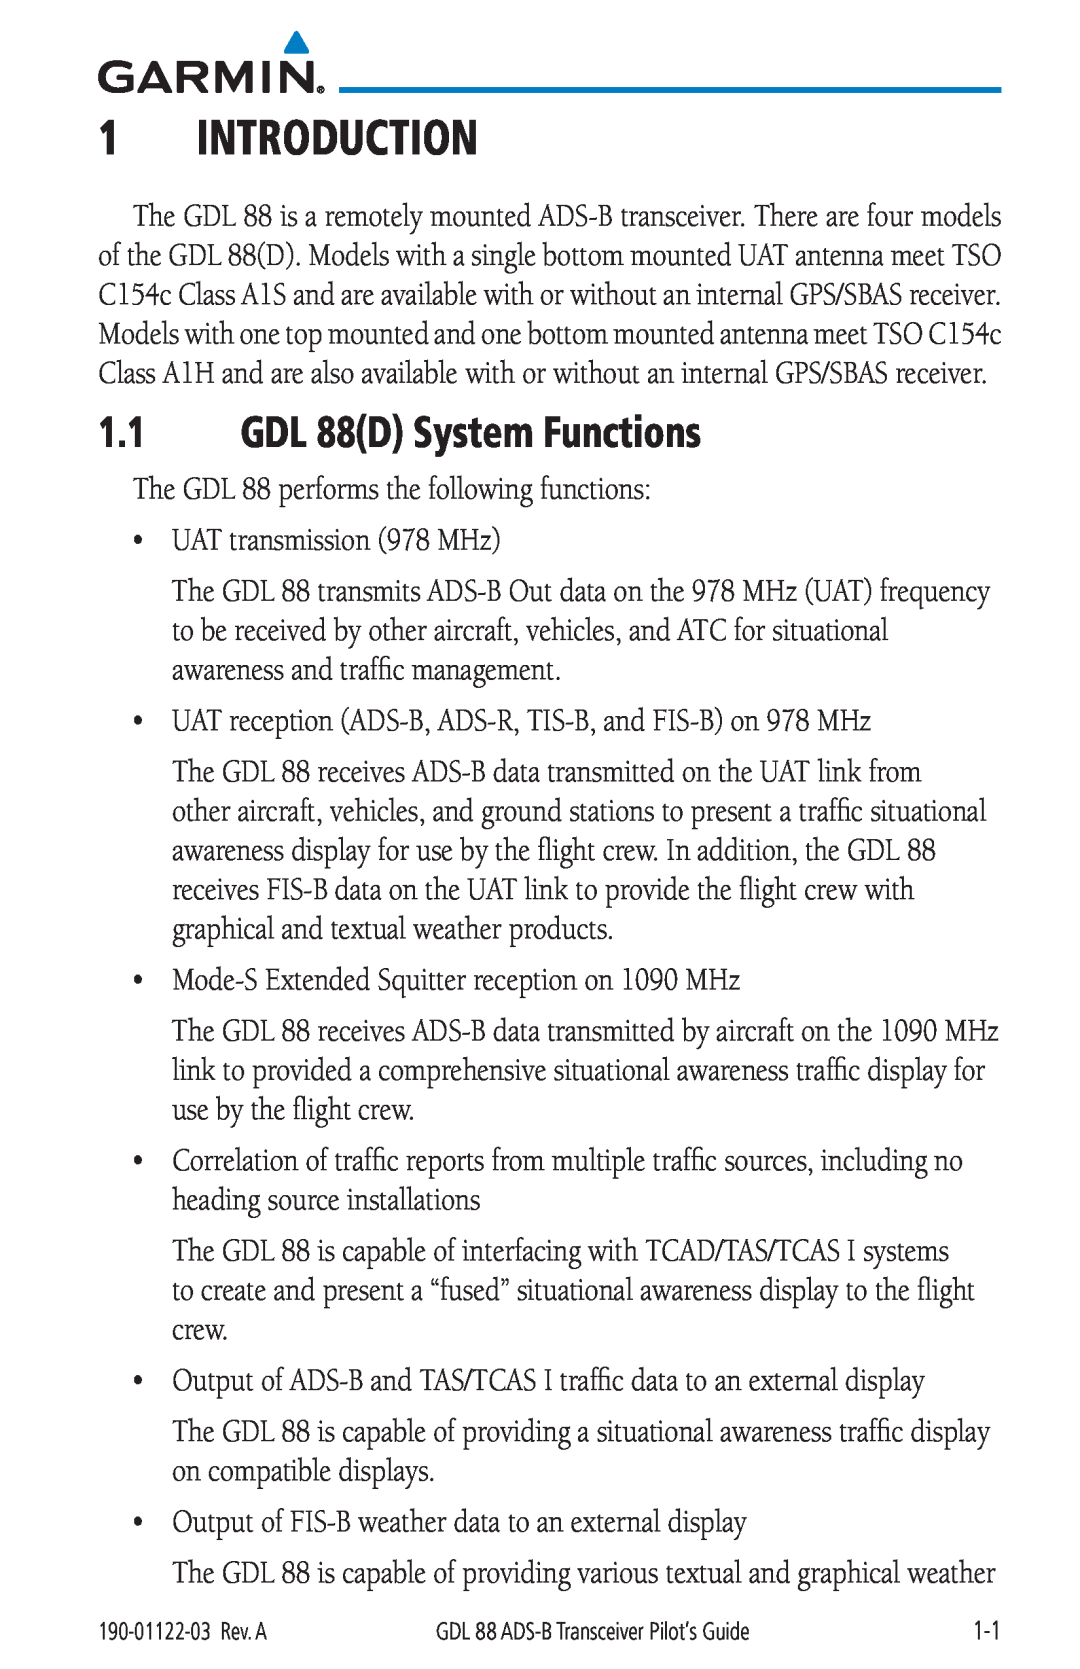 Garmin manual Introduction, GDL 88D System Functions 